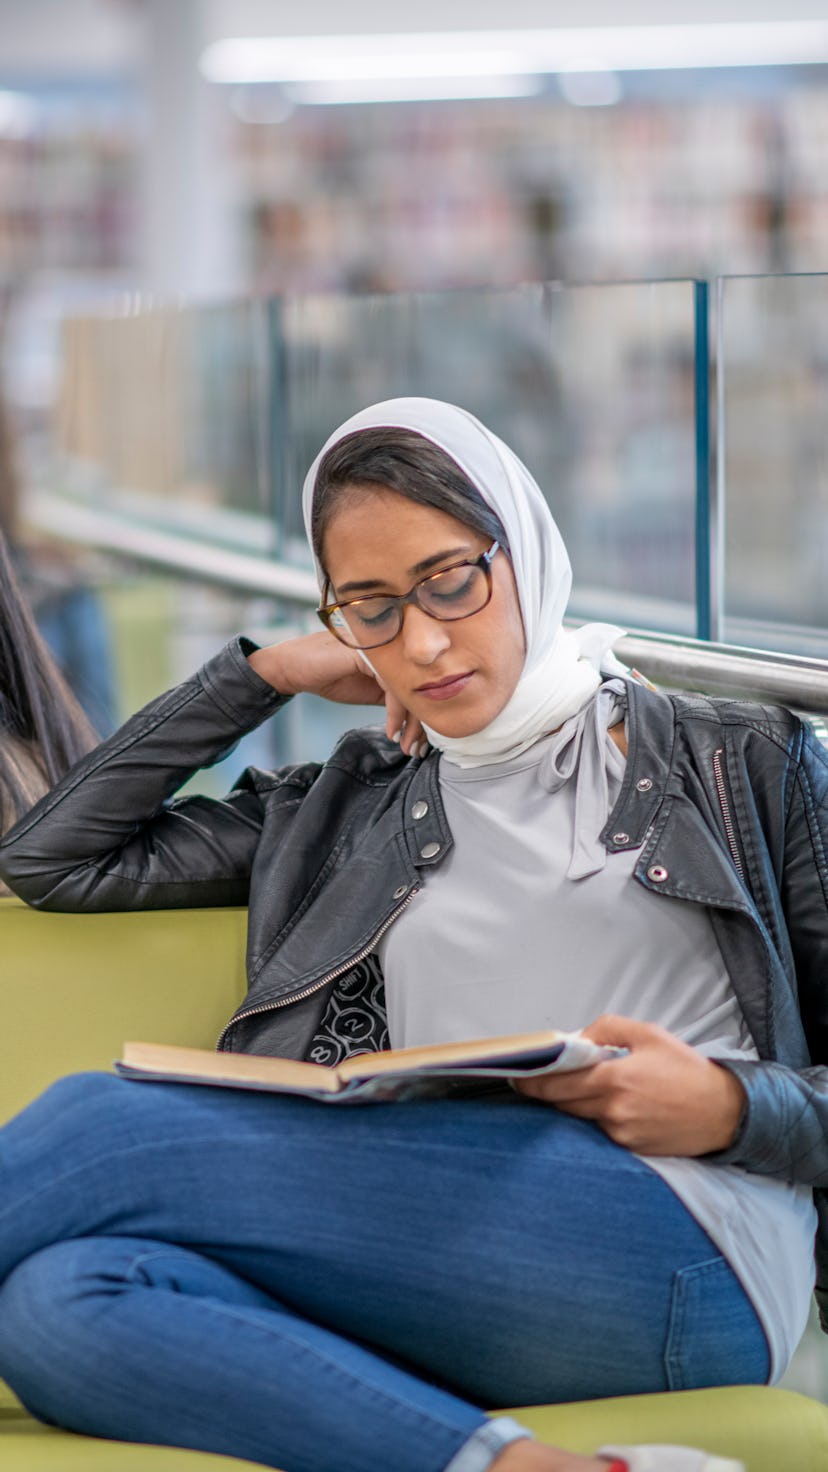 A Middle Eastern woman wearing a hijab sits at a chair beside a railing and studies.